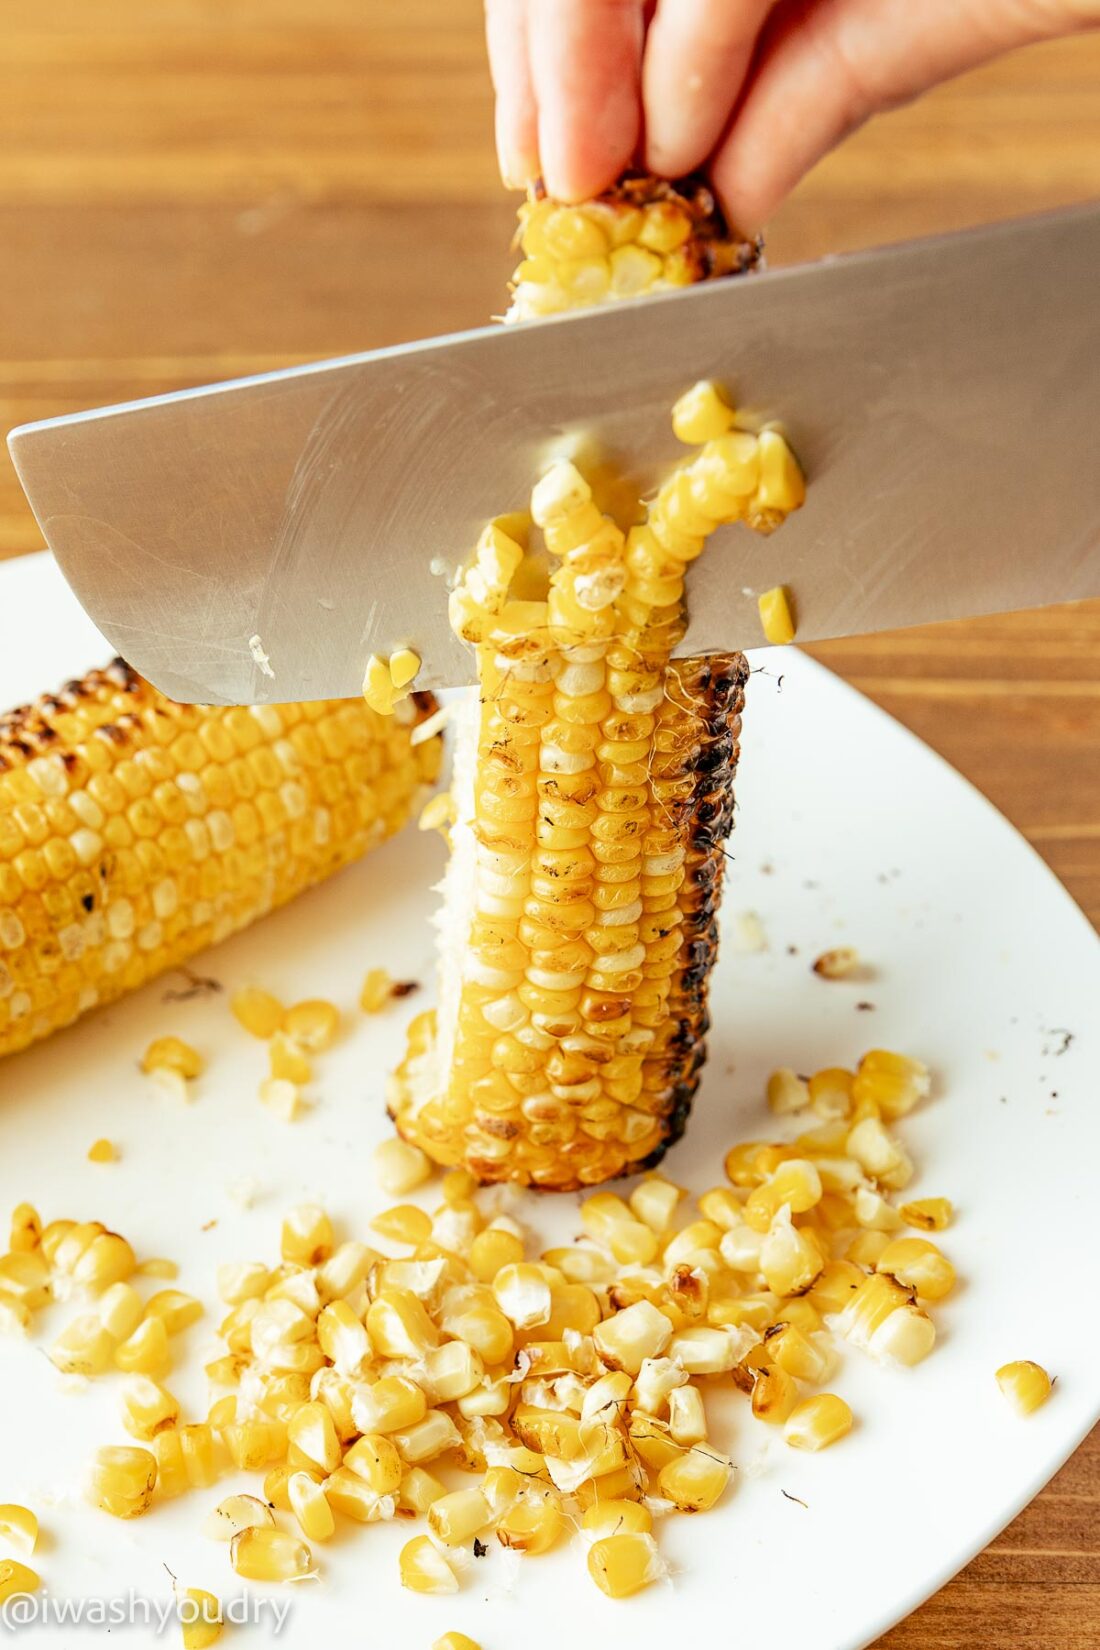 slice the grilled corn on the cob with a knife.